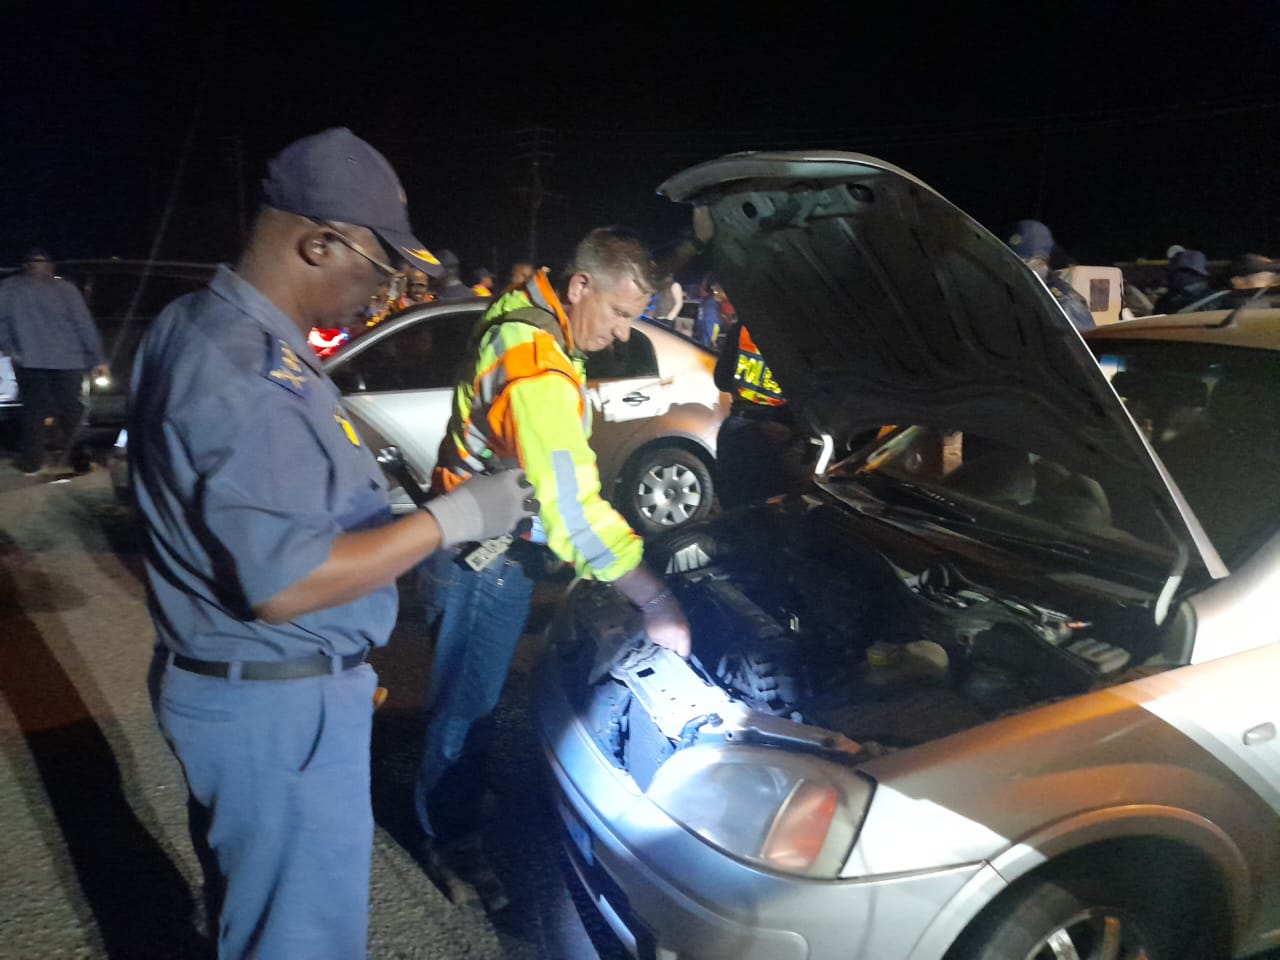 Several arrested drunk and driving, contravening the Immigration Act and possession on drugs